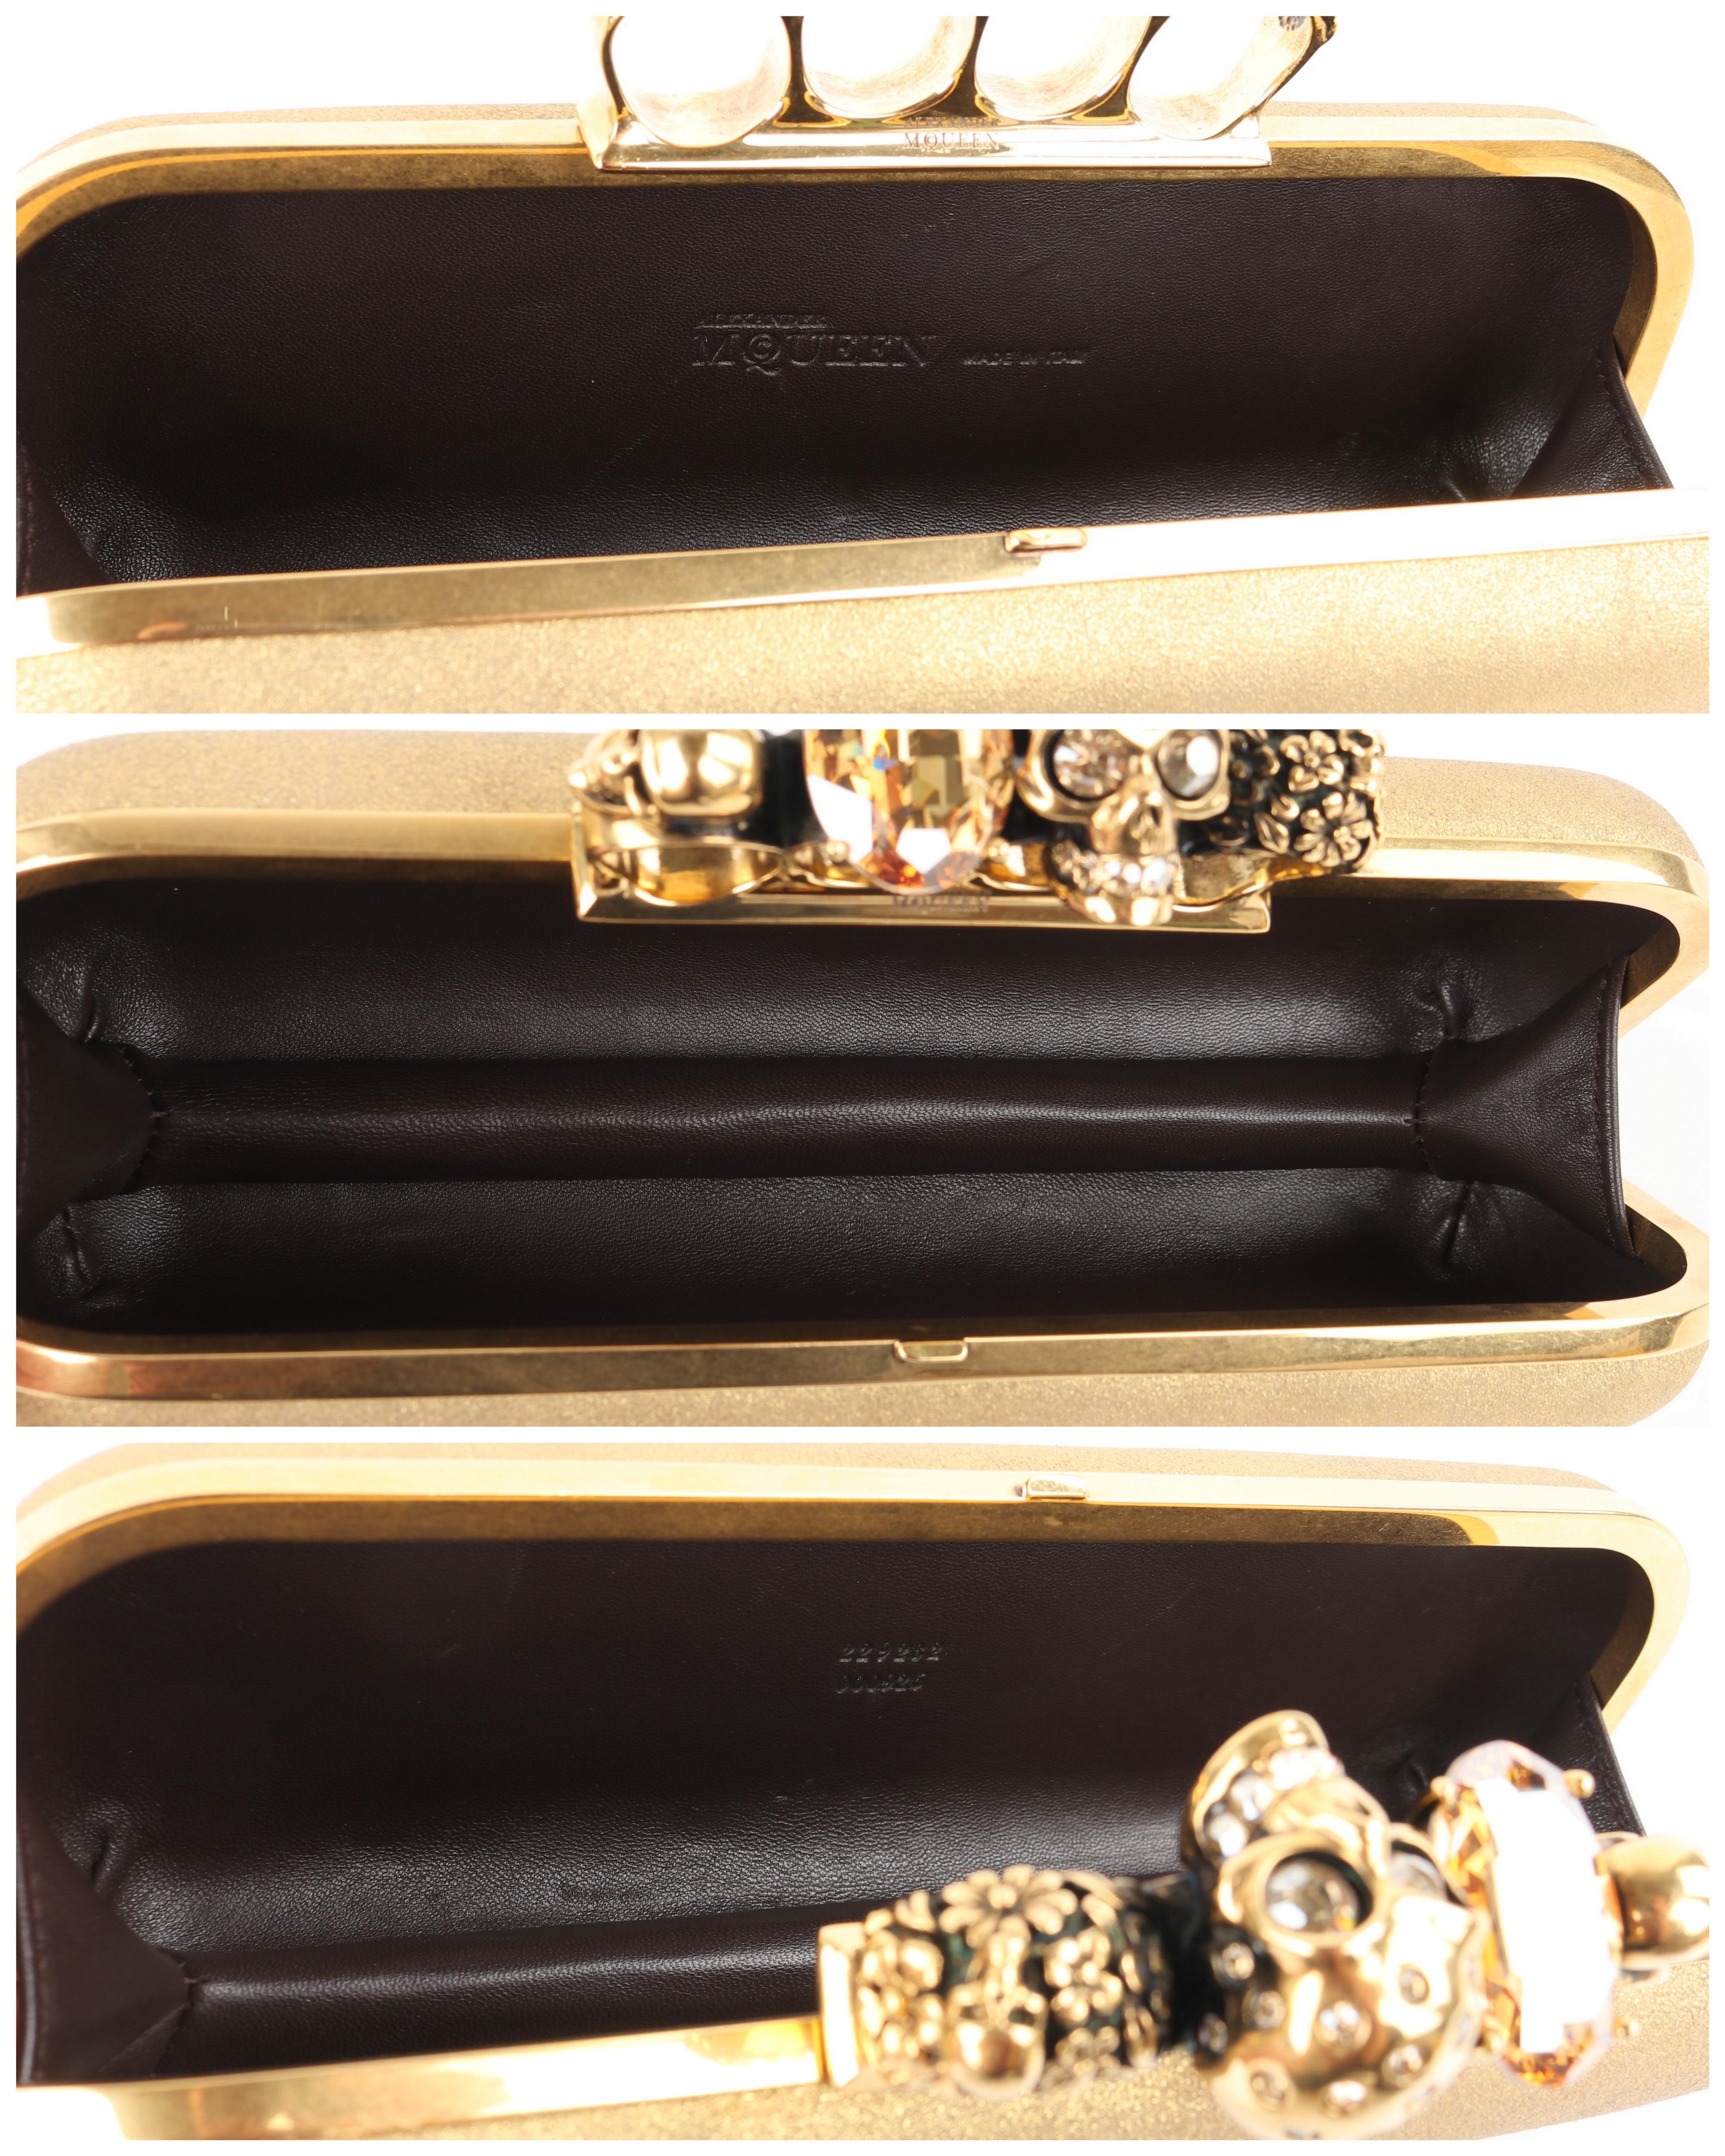 ALEXANDER McQUEEN c.2013 Gold Glitter Leather Metal Knuckle Ring Duster Clutch For Sale 2